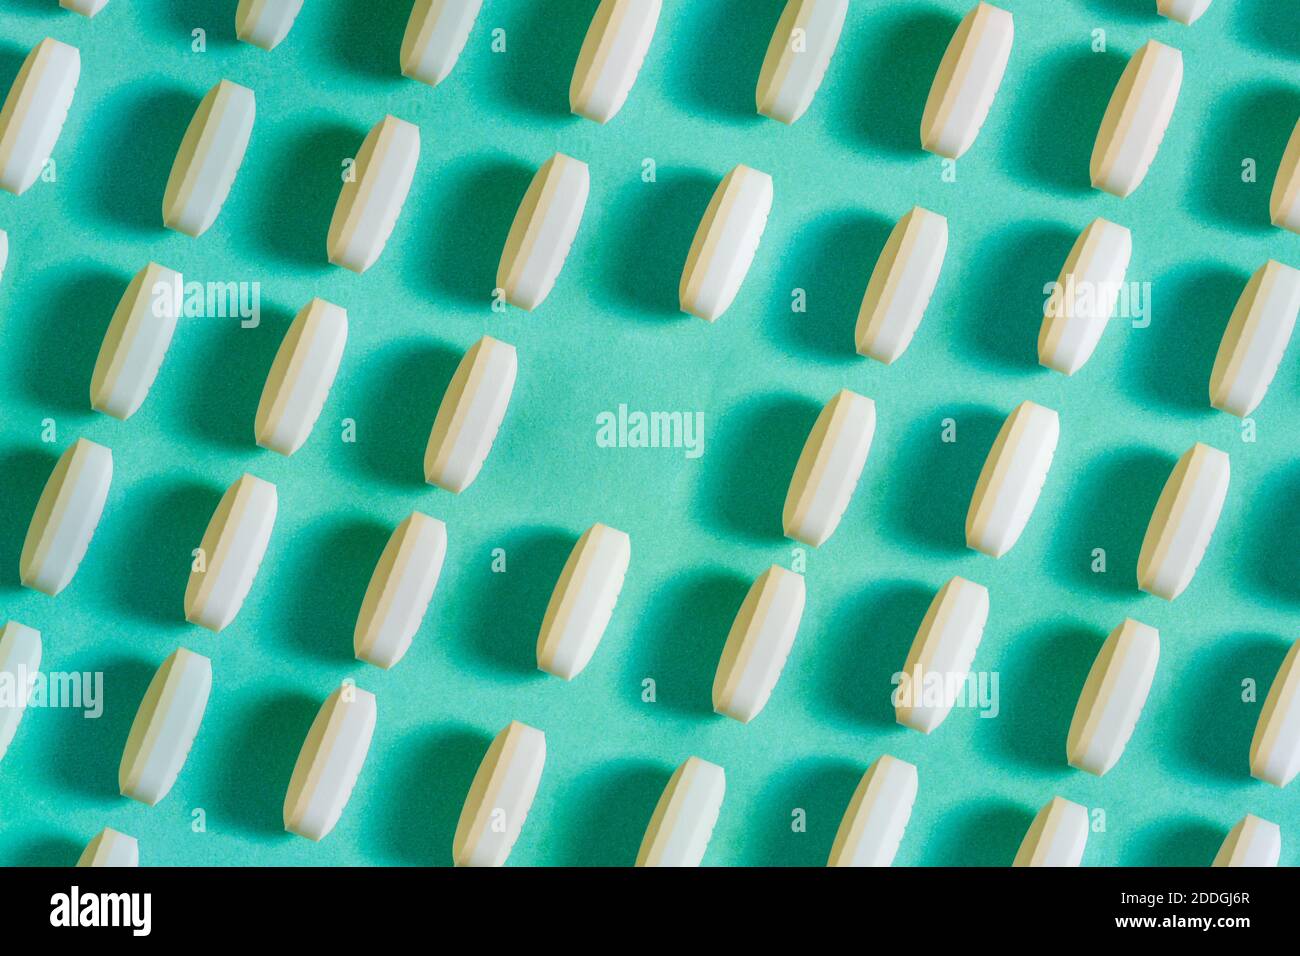 Rows of pills on a blue background. A linear pattern in which the lack of medicine leaves a clean space. Stock Photo